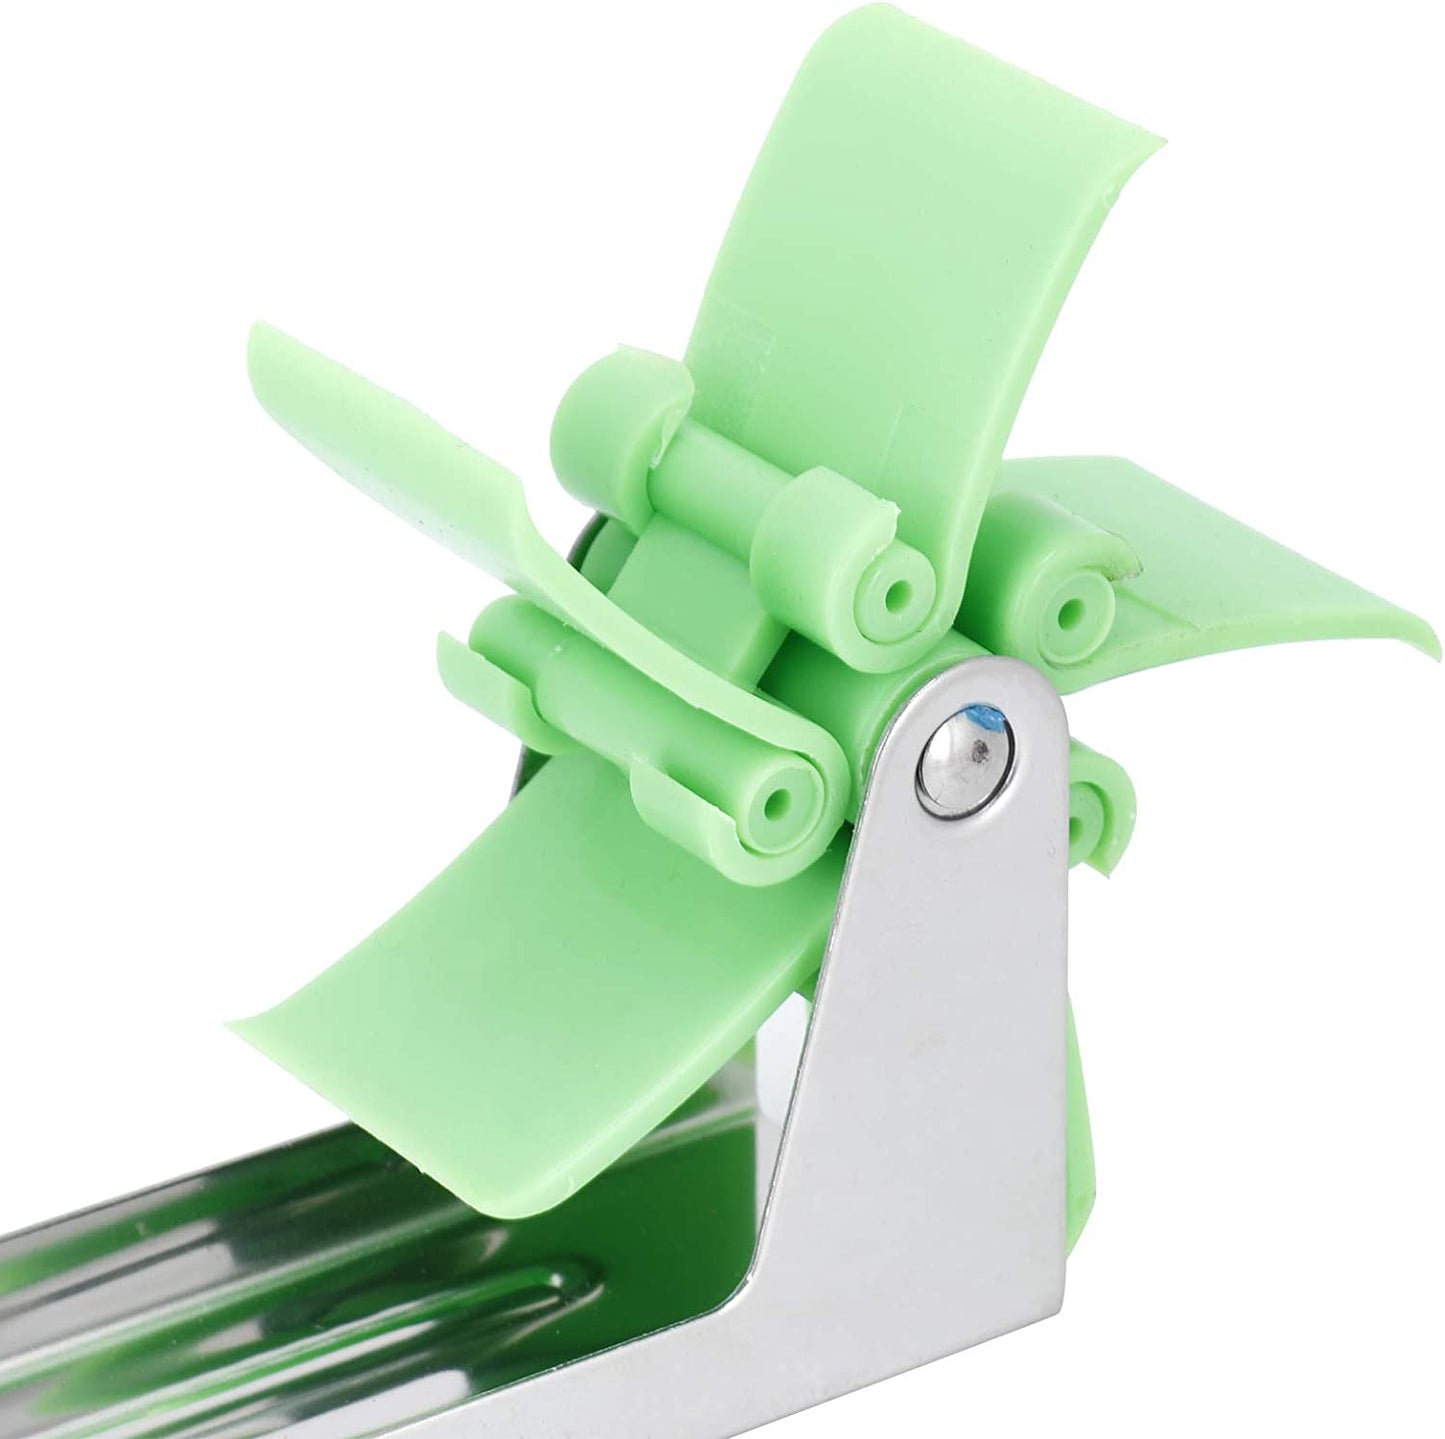 Stainless Steel Washable Watermelon Cutter Windmill Slicer Cutter Peeler